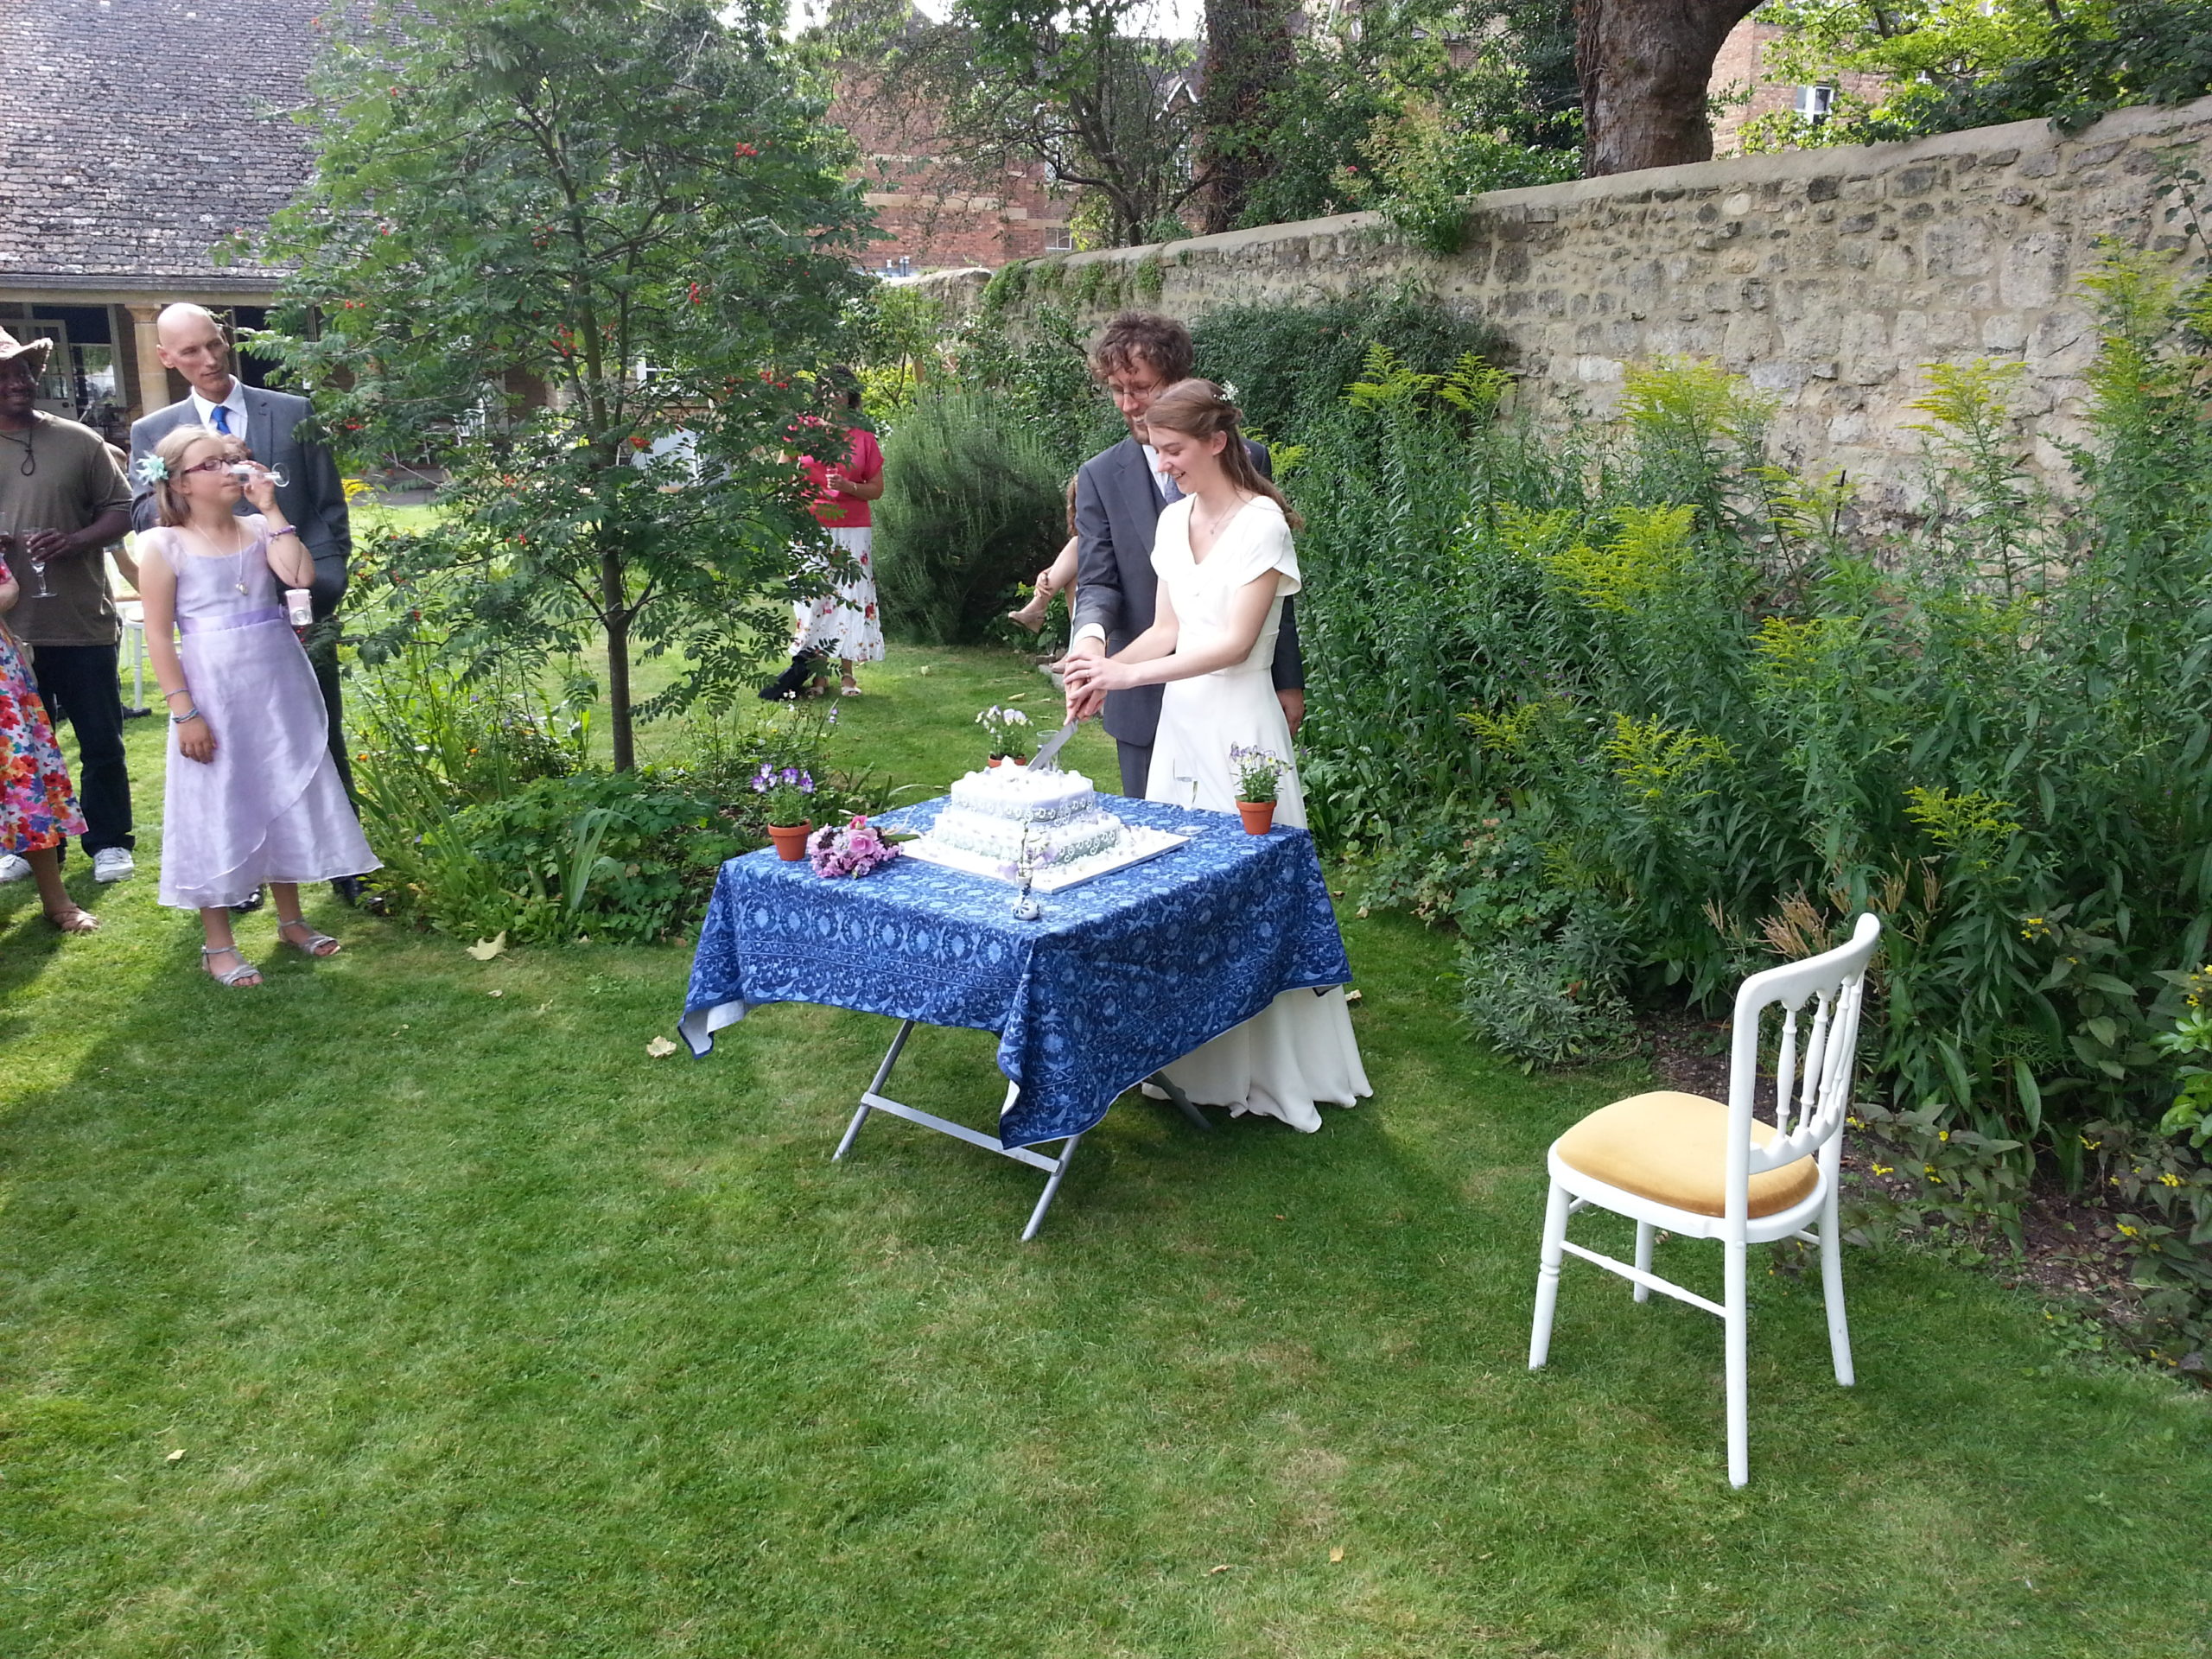 Matthew and Katherine cut the cake in the garden of the Quaker Meeting House.